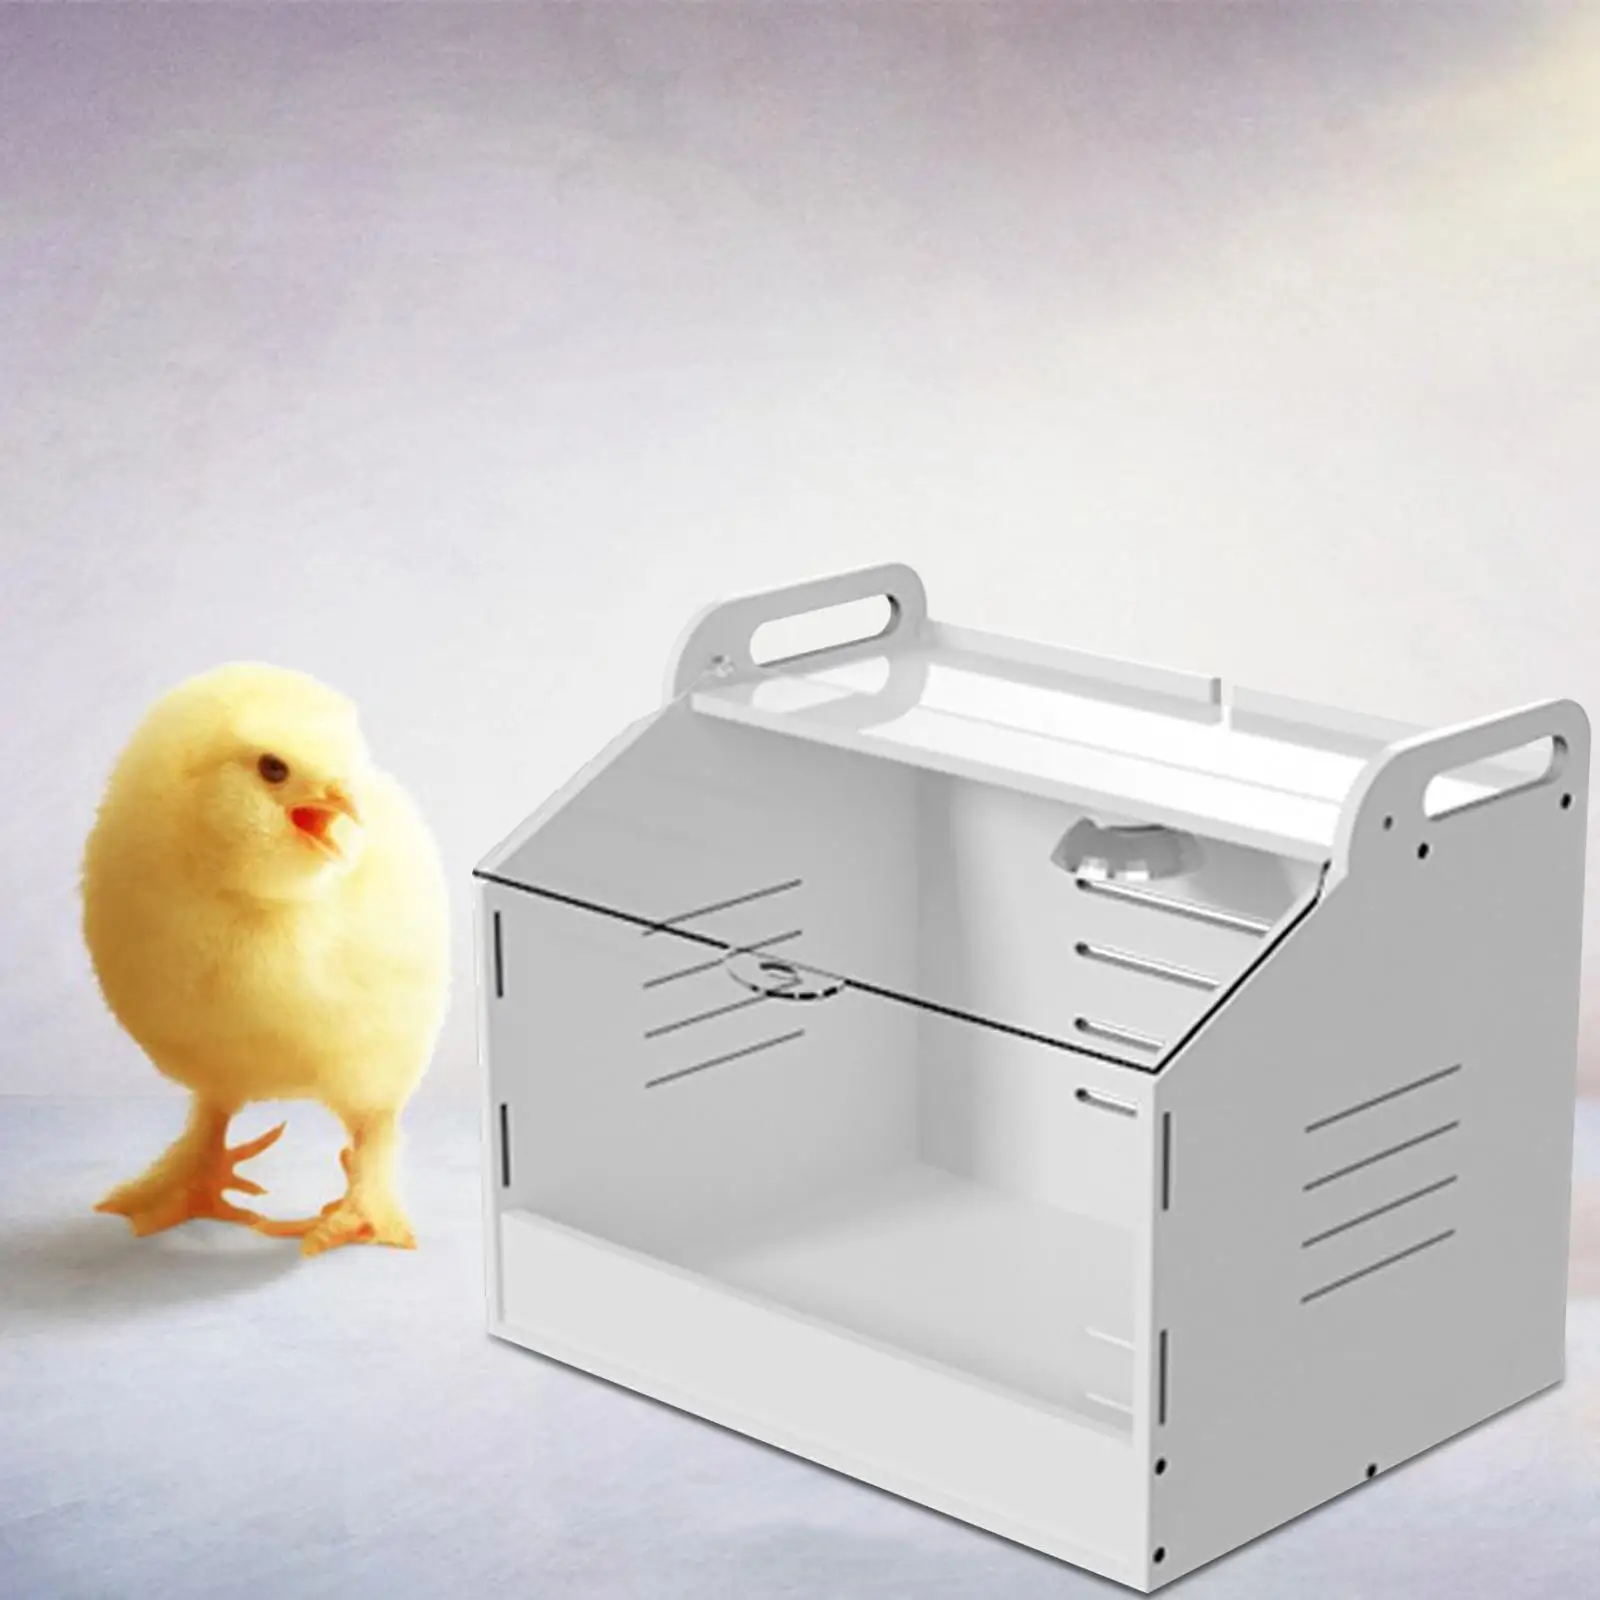 Egg Incubator Hatching High Temperature Clear Top Cover Incubation Box Automatic Poultry Hatcher Machine for Brooding Turkey